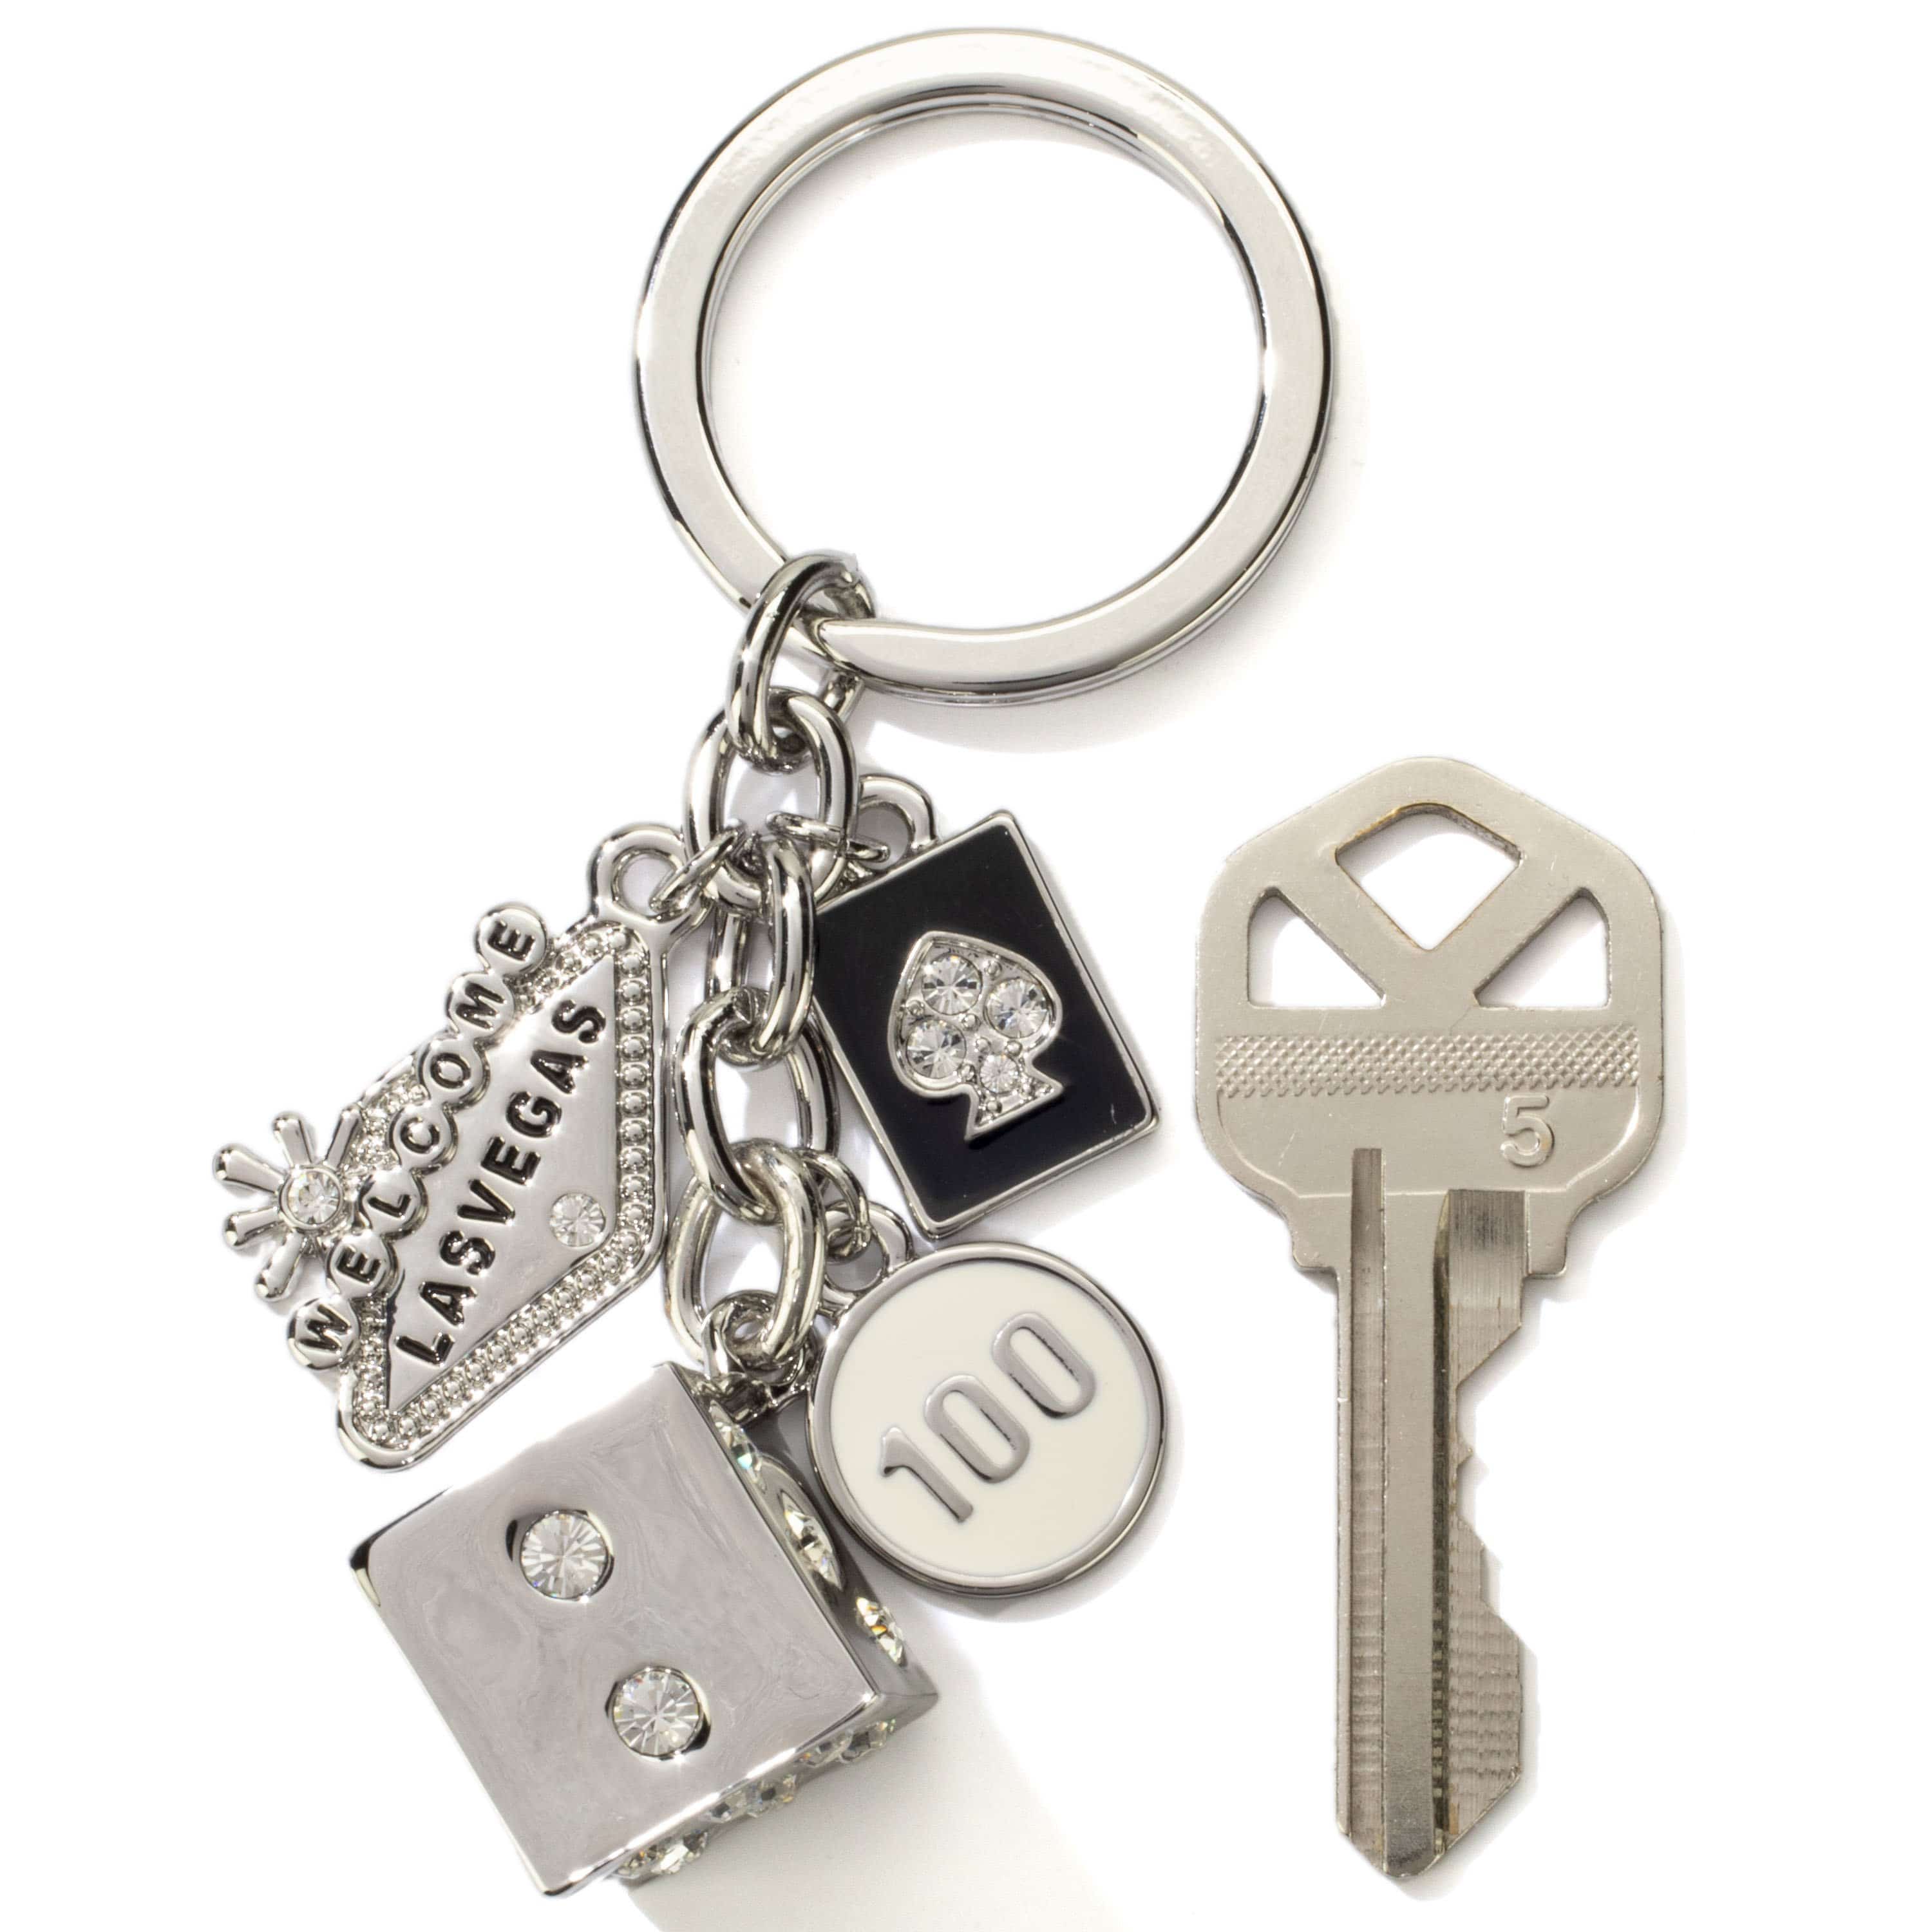 Kalifano Crystal Keychains Las Vegas Welcome Sign Silver Dice Keychain made with Clear Swarovski Crystals SKC-186